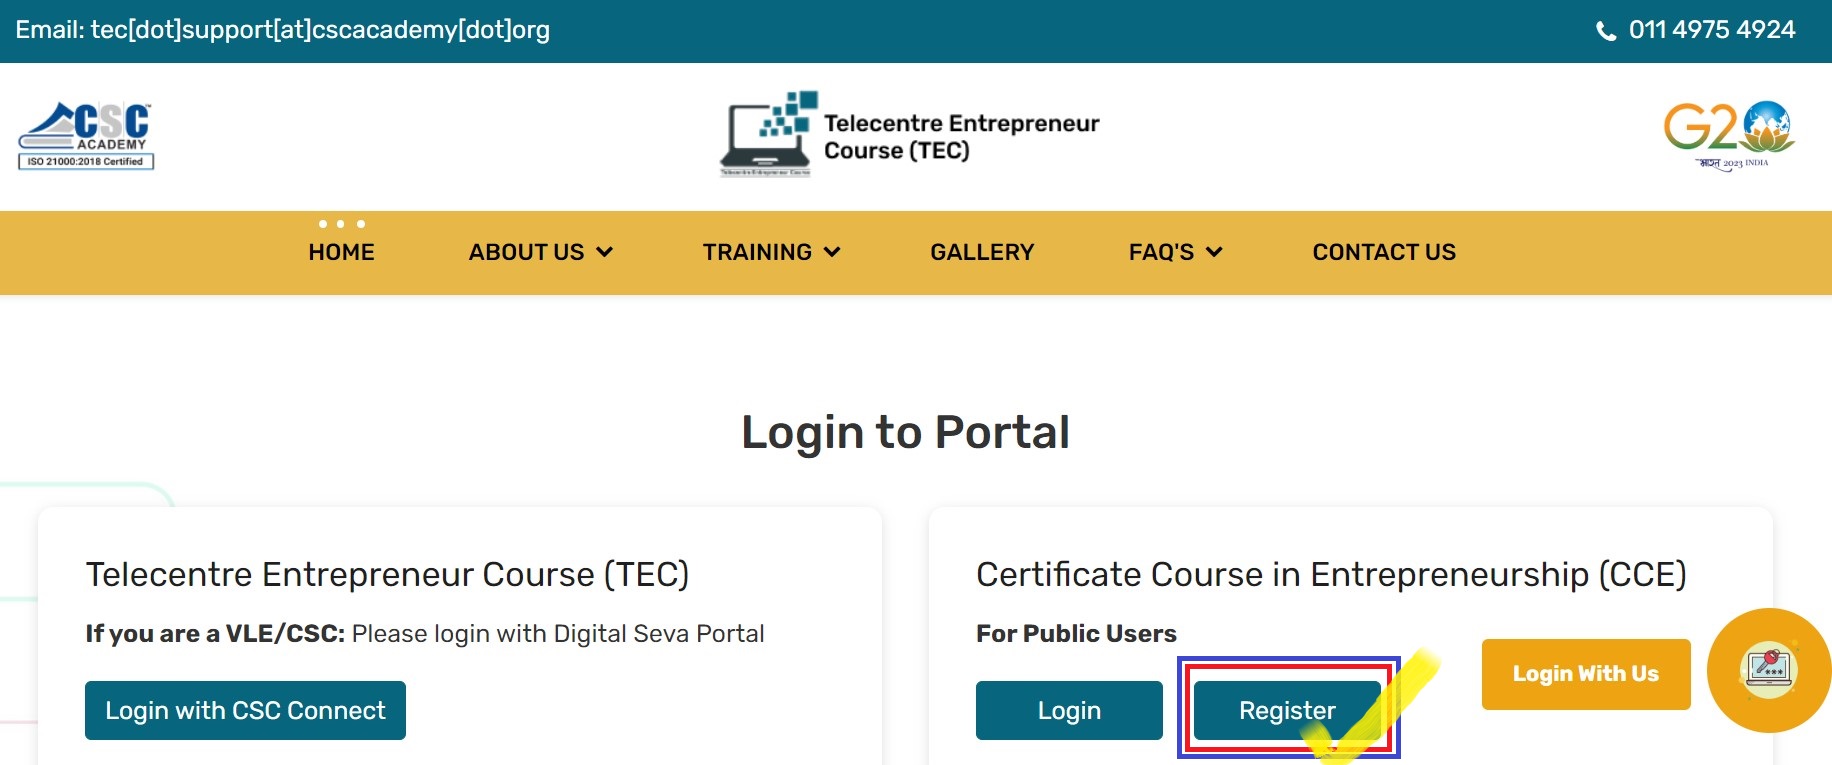 How-to-apply-tec-certificate-number